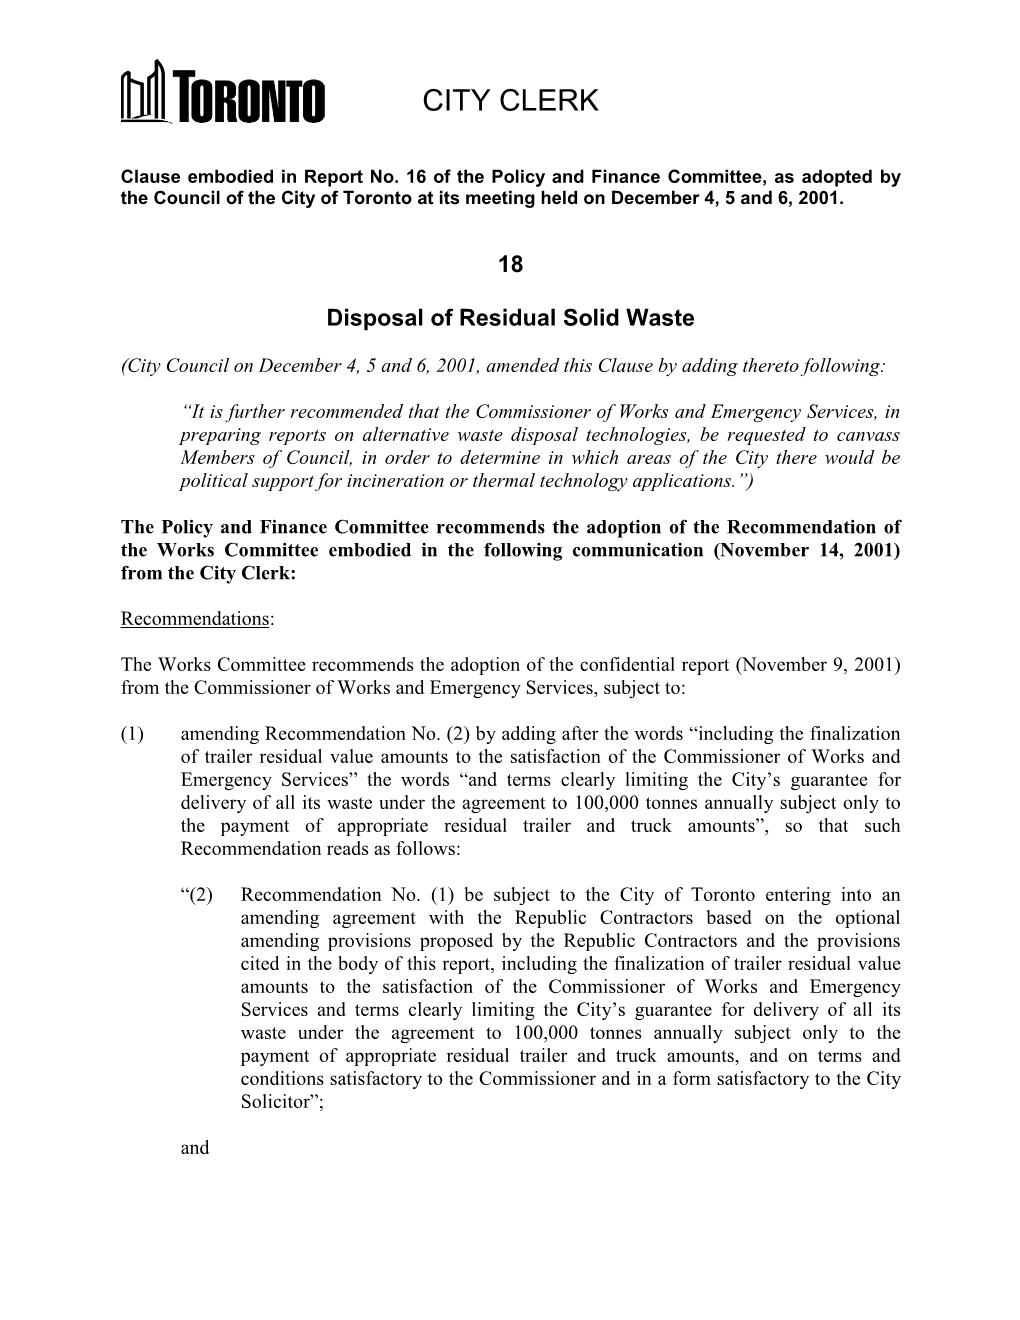 Disposal of Residual Solid Waste